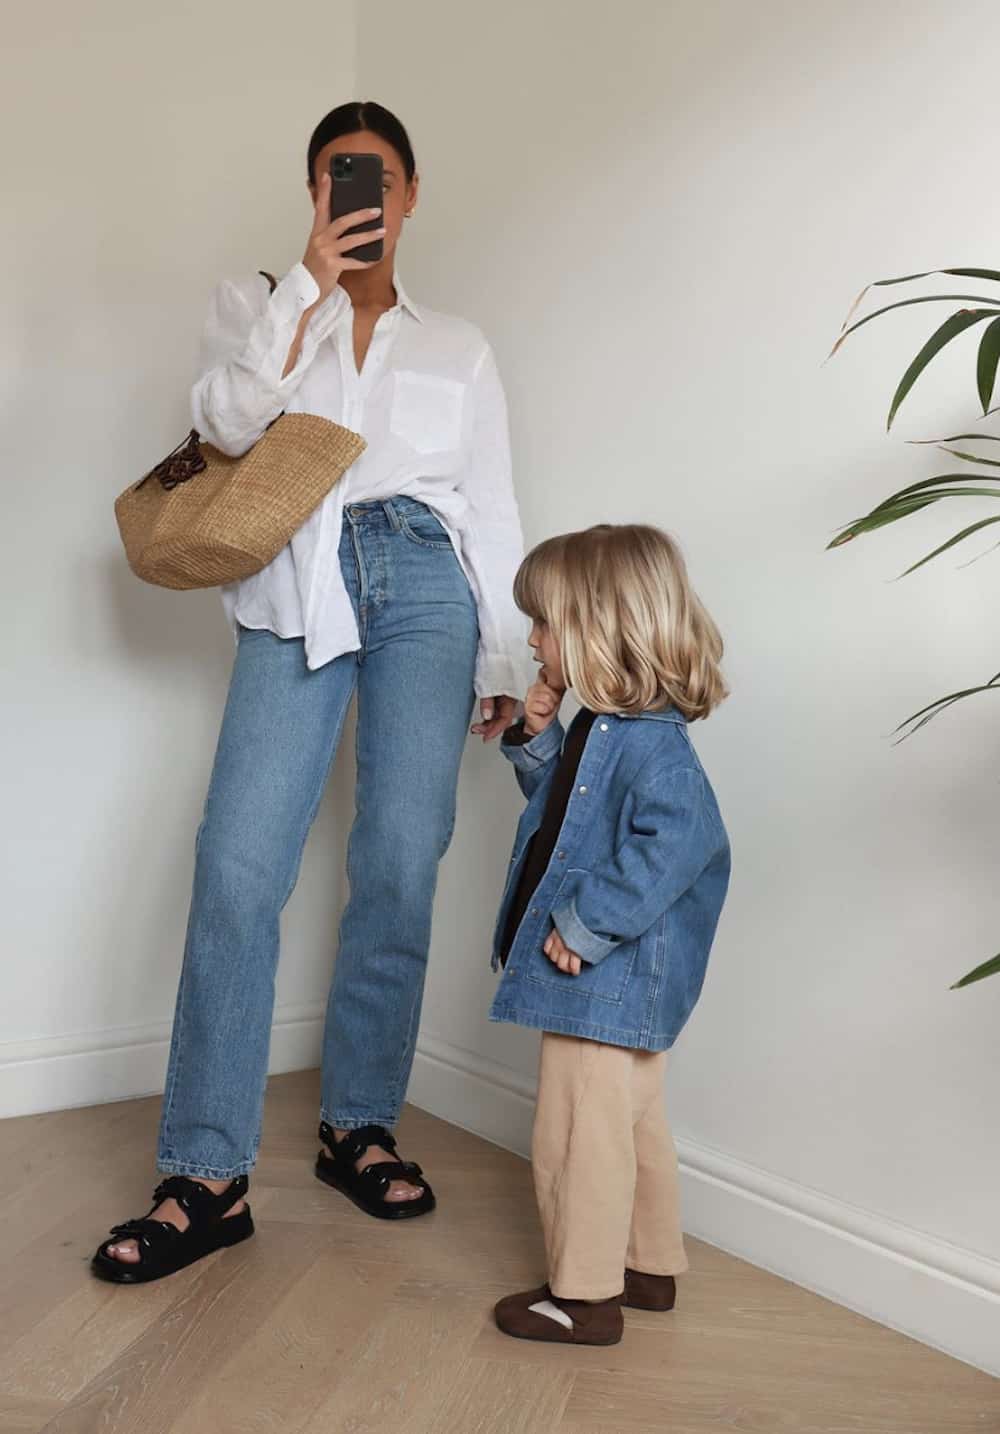 image of a mom and her daughter, she is wearing a white button up shirt, jeans, and black sandals